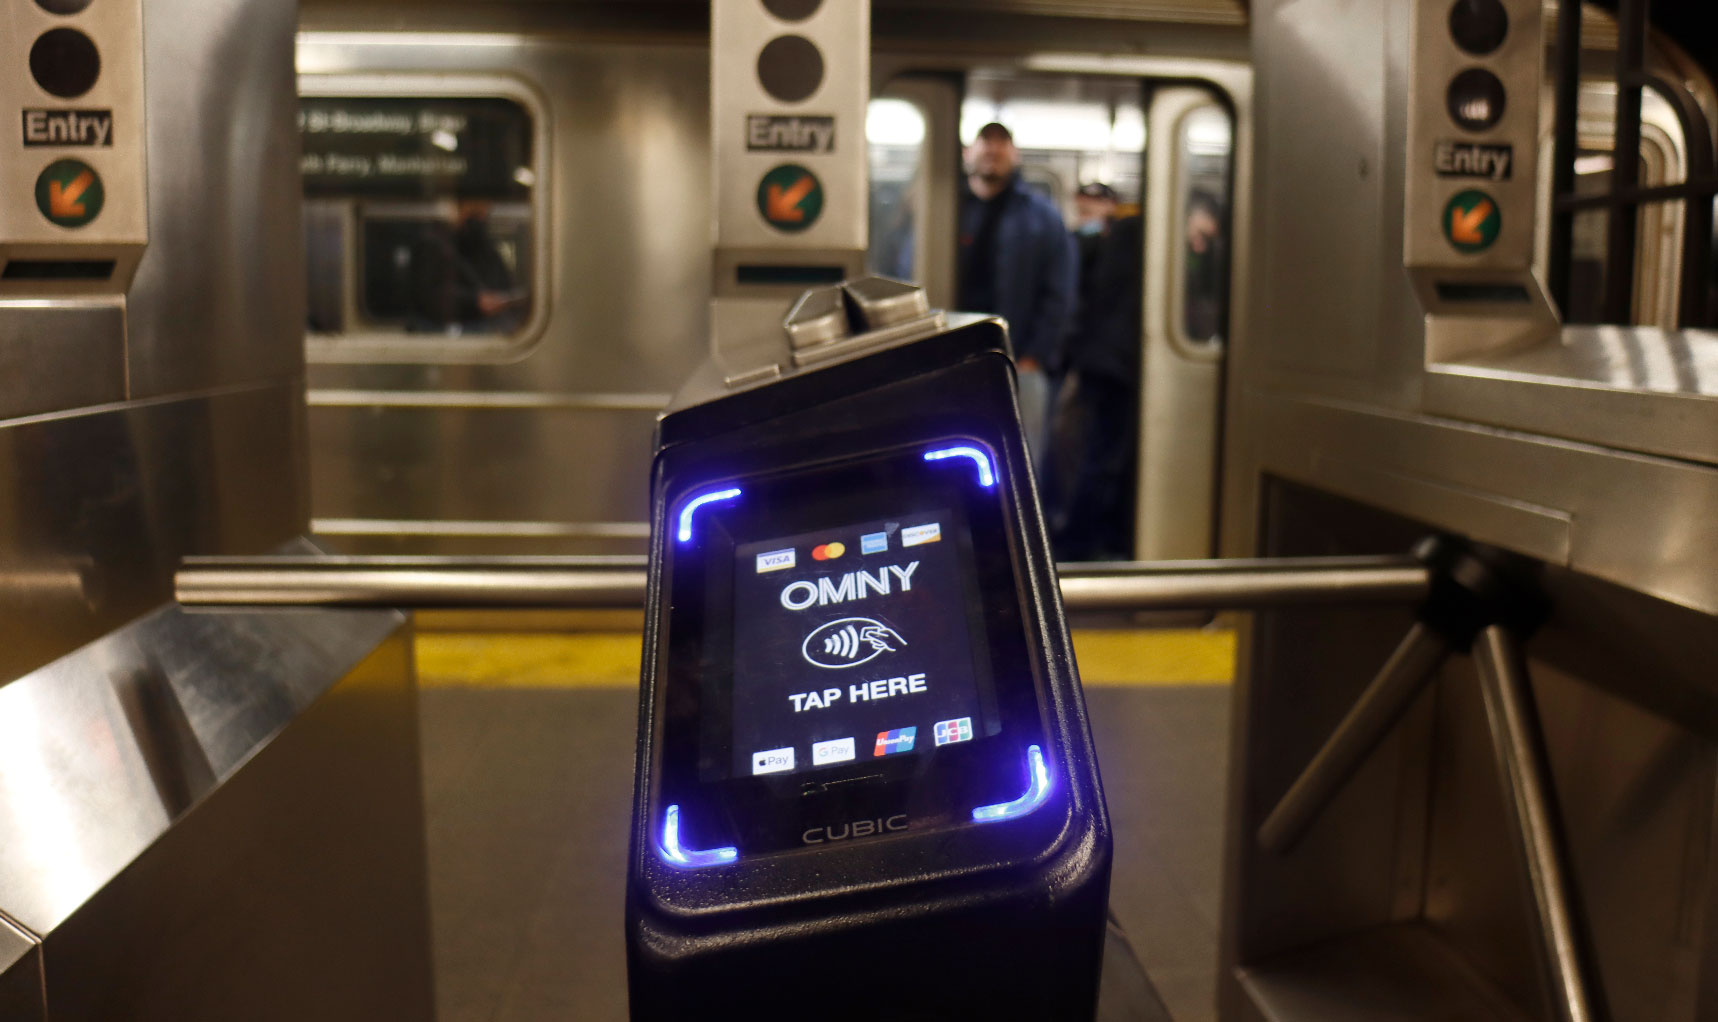 NEW YORK, NY - MARCH 5: An OMNY fare reader pictured in front of a train on the 1 line at the Christopher Street subway station on March 5, 2023 in New York City.  (Photo by Gary Hershawn/Getty Images)